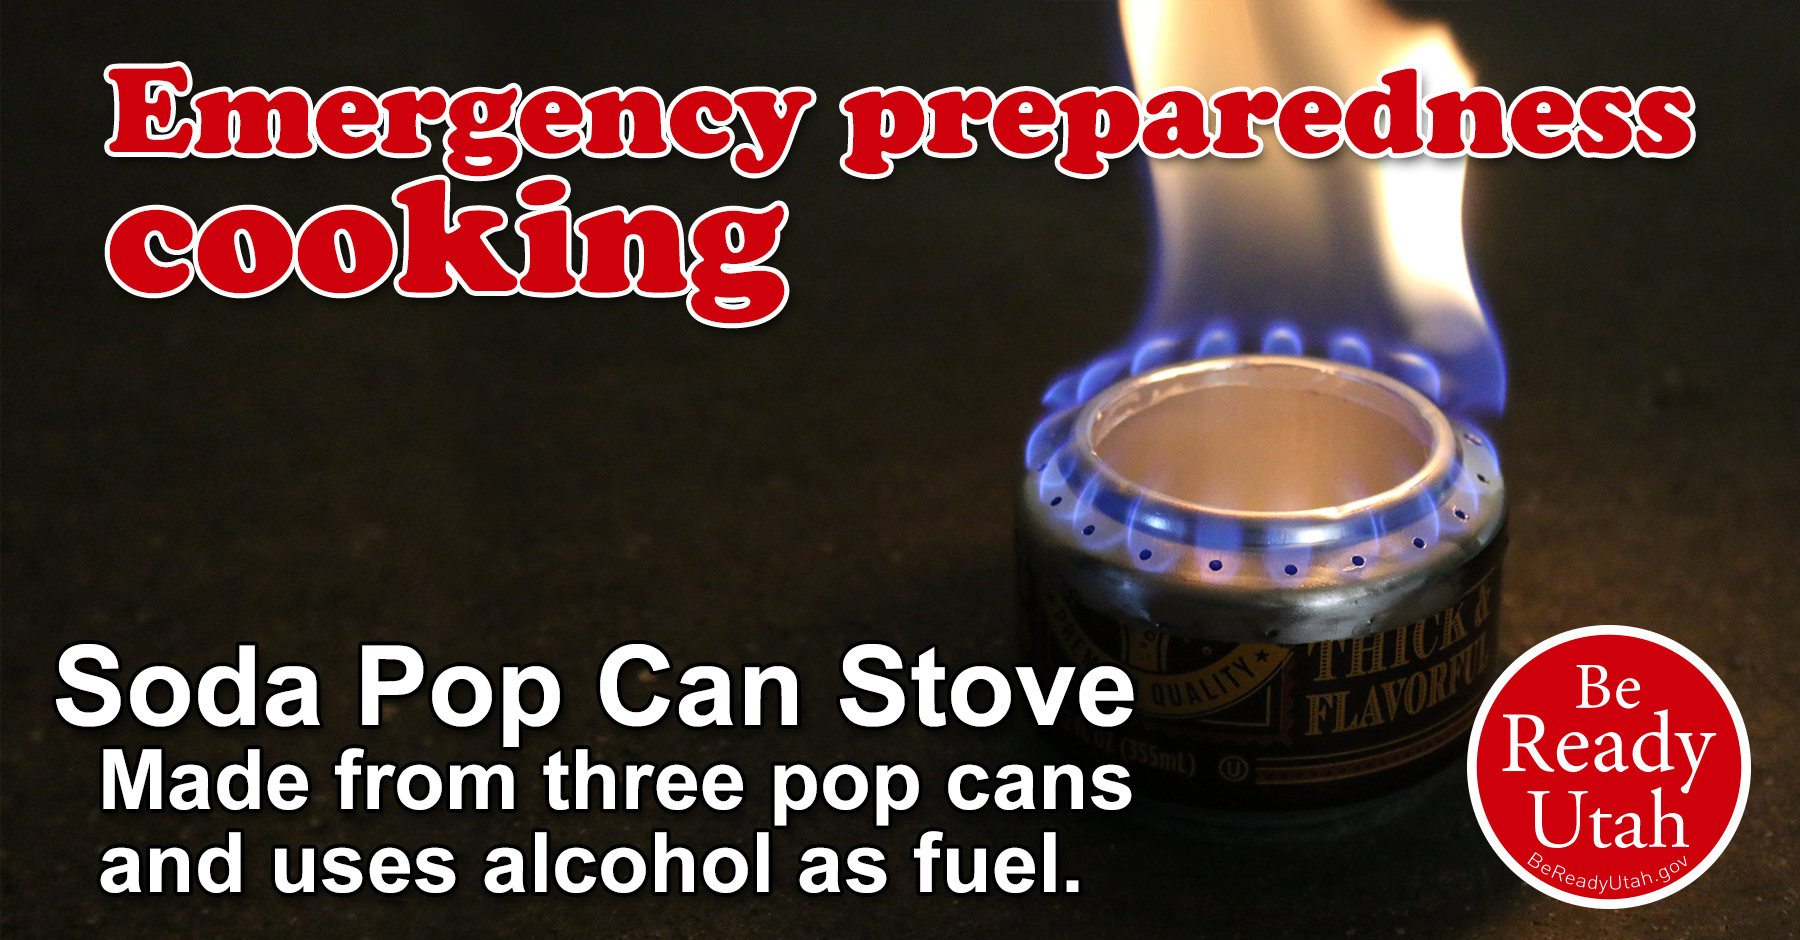 Soda Can Stove Uses Alcohol as Fuel